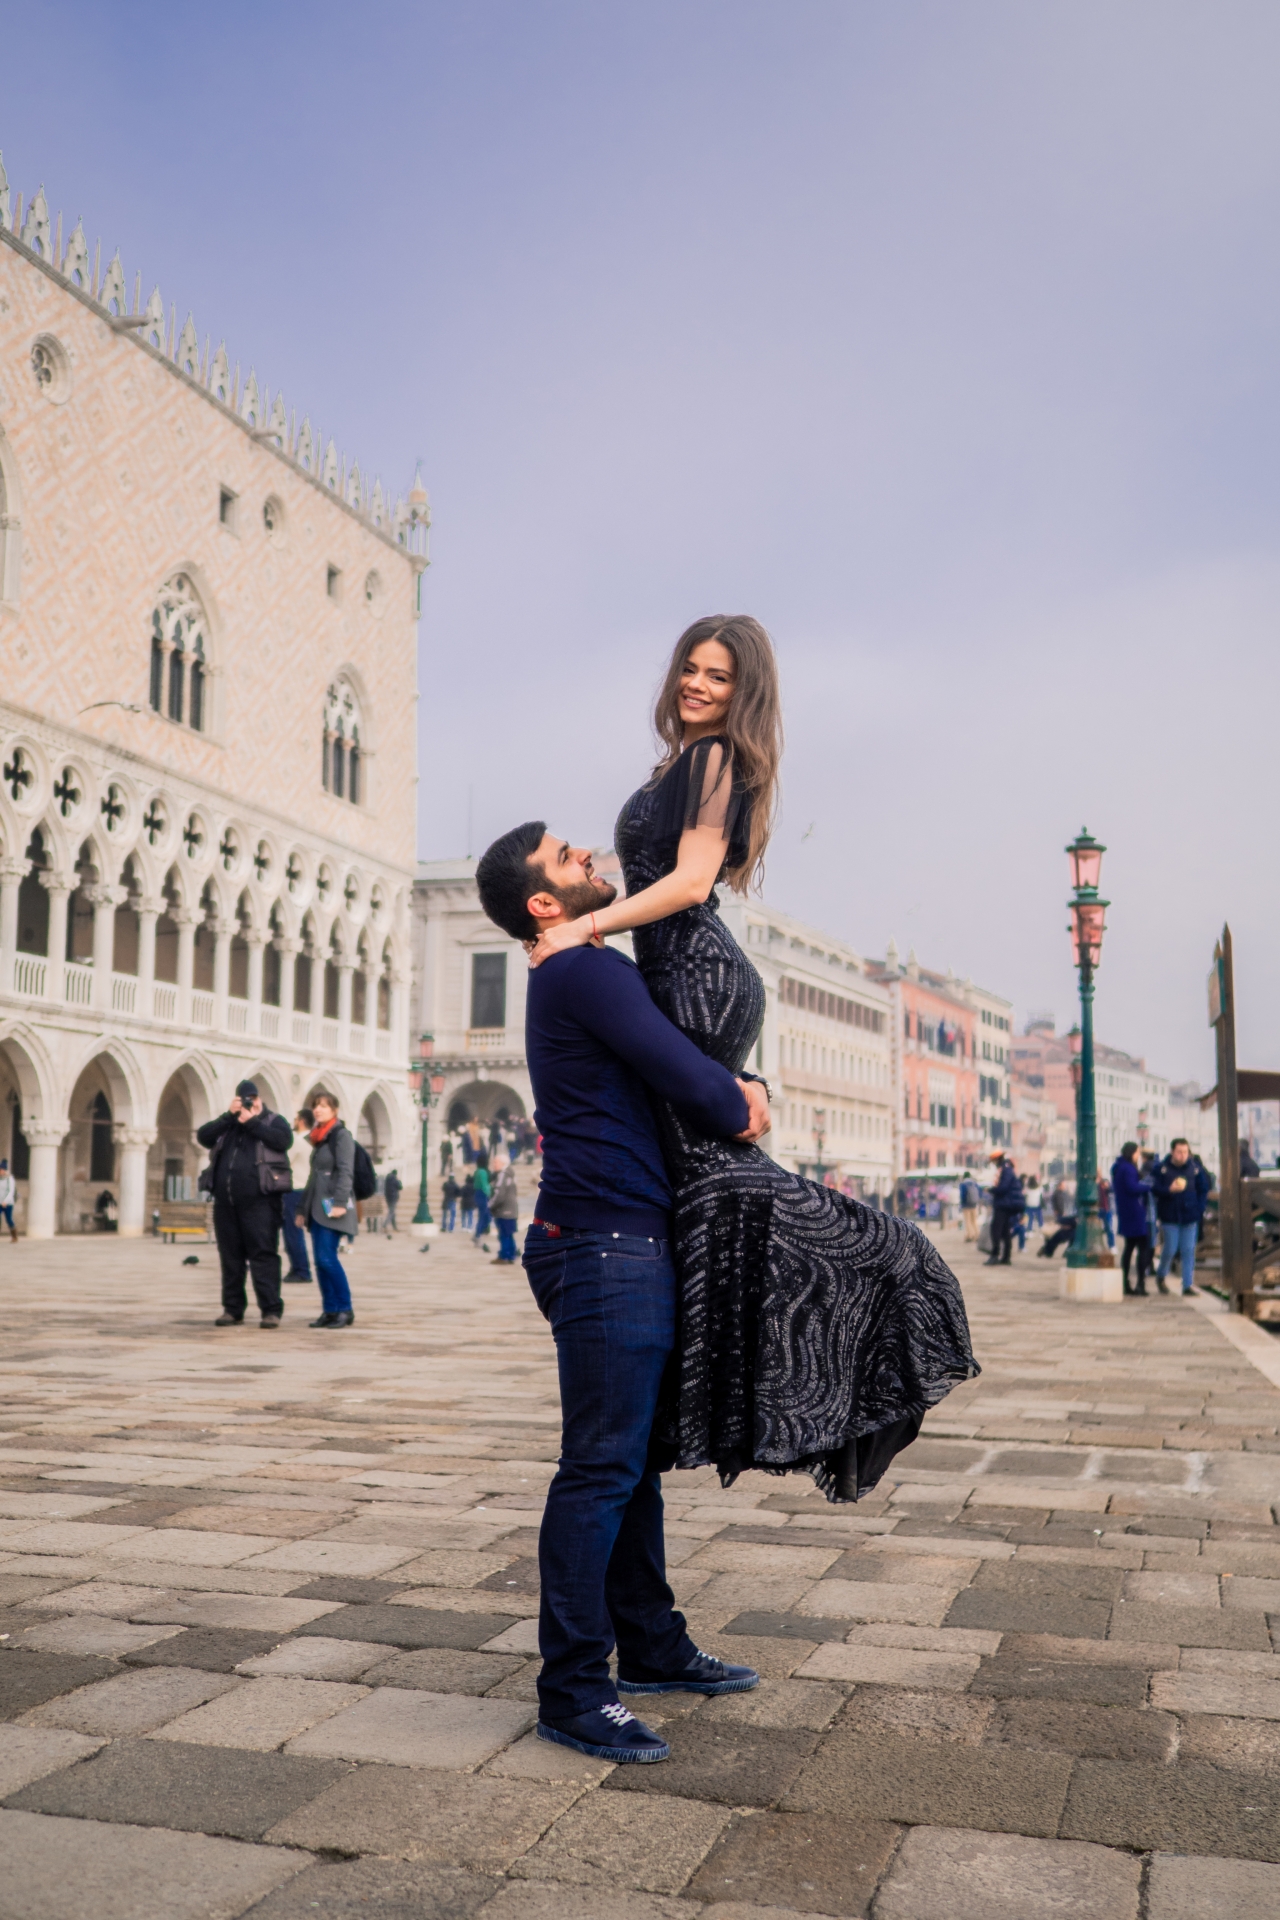 ﻿Armenian engagement photoshoot in Venice and in the church 